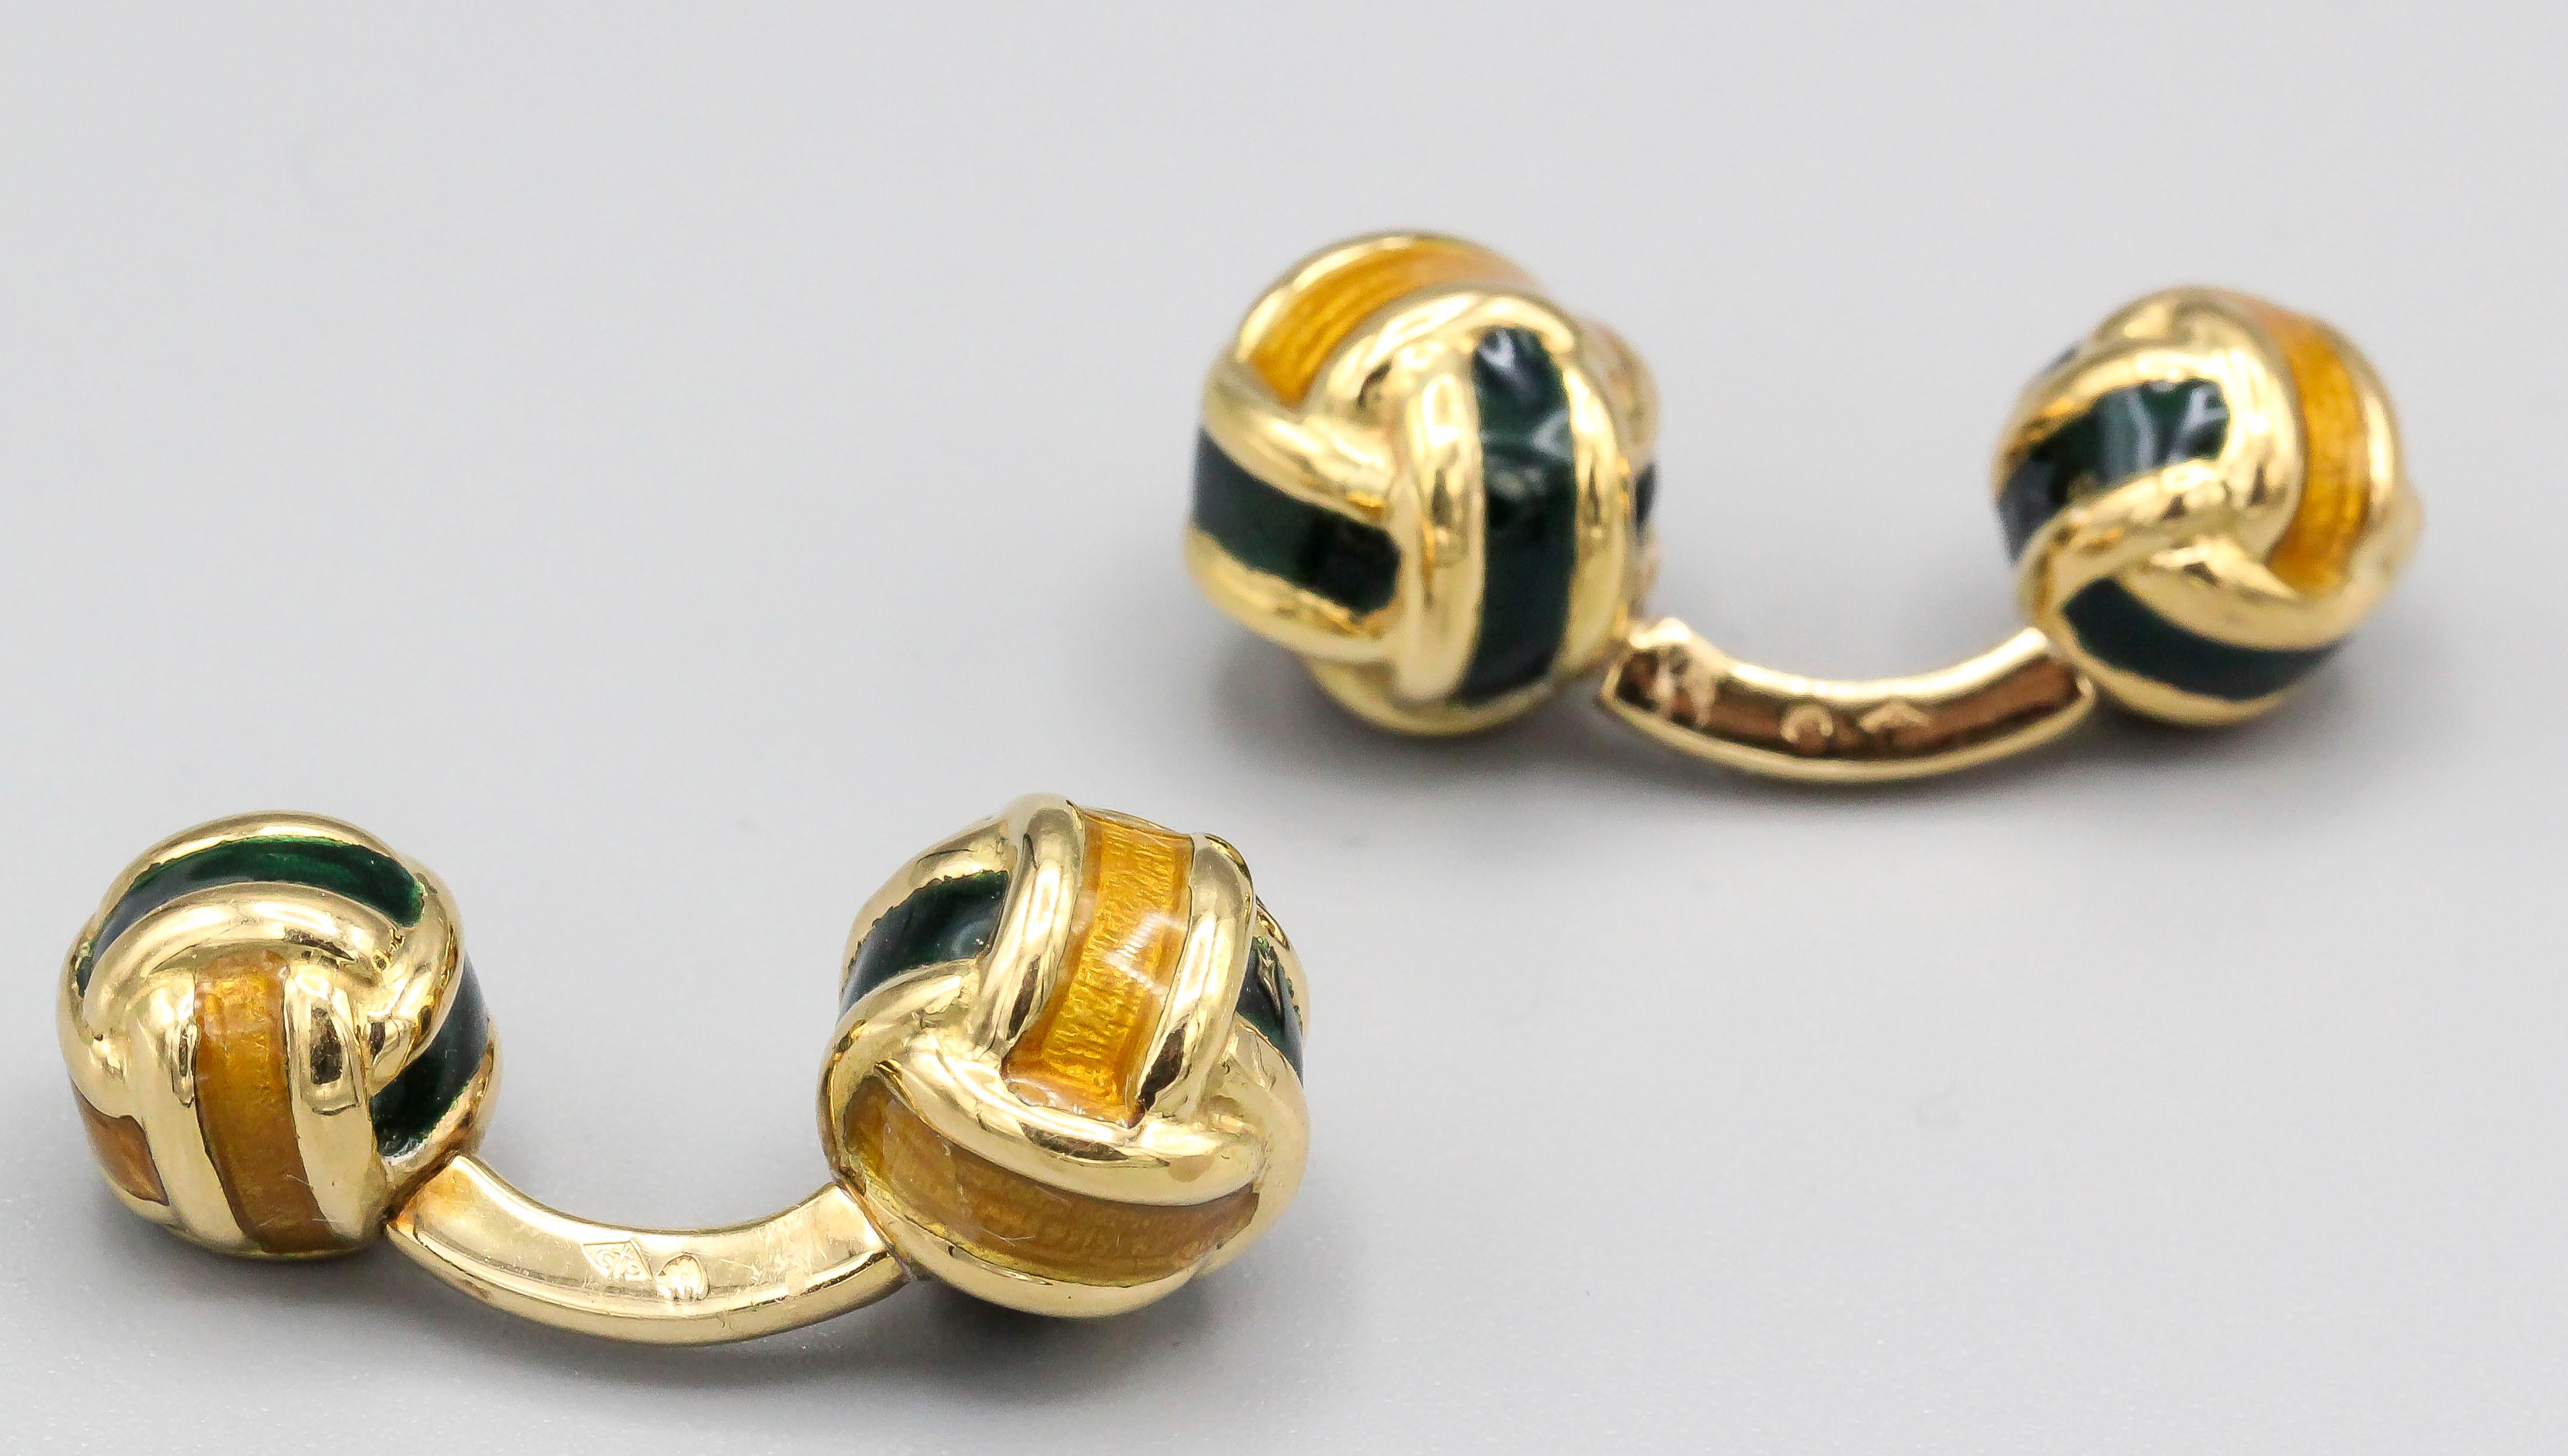 Fine 18K yellow gold and enamel cufflinks of French origin. They resemble knots, with one side slightly larger than the other, and featuring dark green and yellow enamel.

Hallmarks: French 18K gold assay mark, maker's mark.
